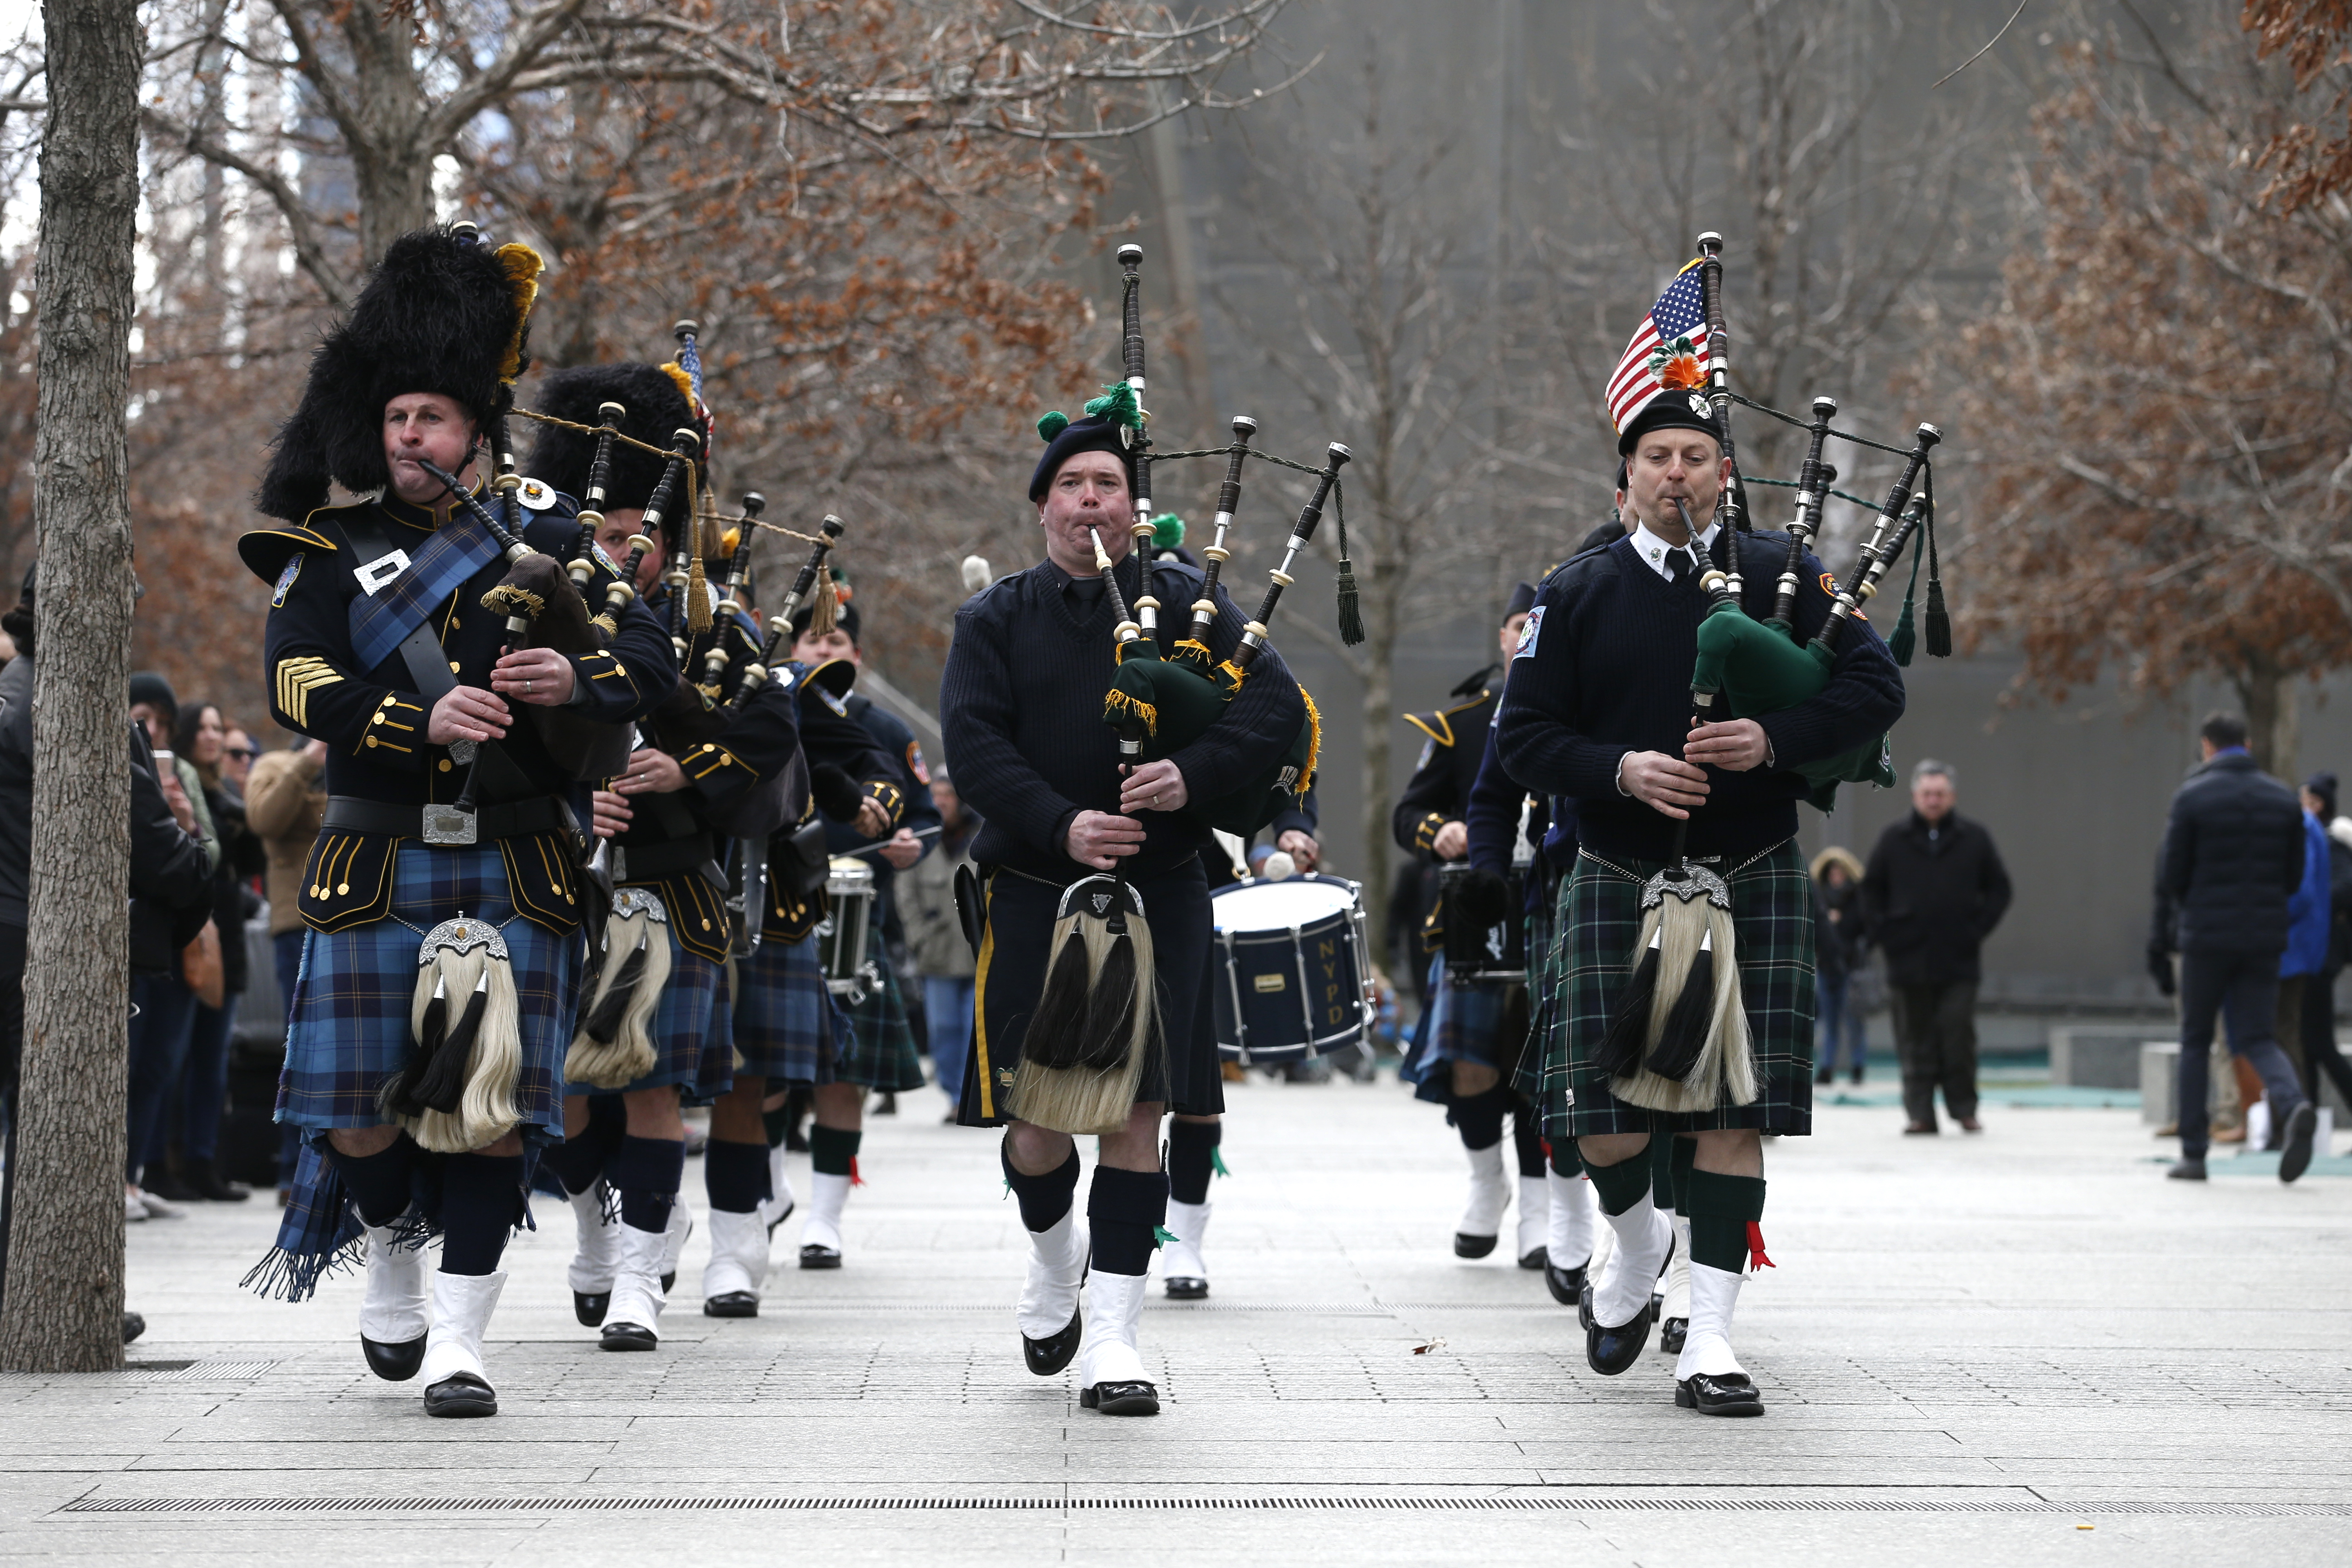 Bagpipe and drum players affiliated with the NYPD and the Port Authority play at the 9/11 Memorial on a cloudy autumn day.